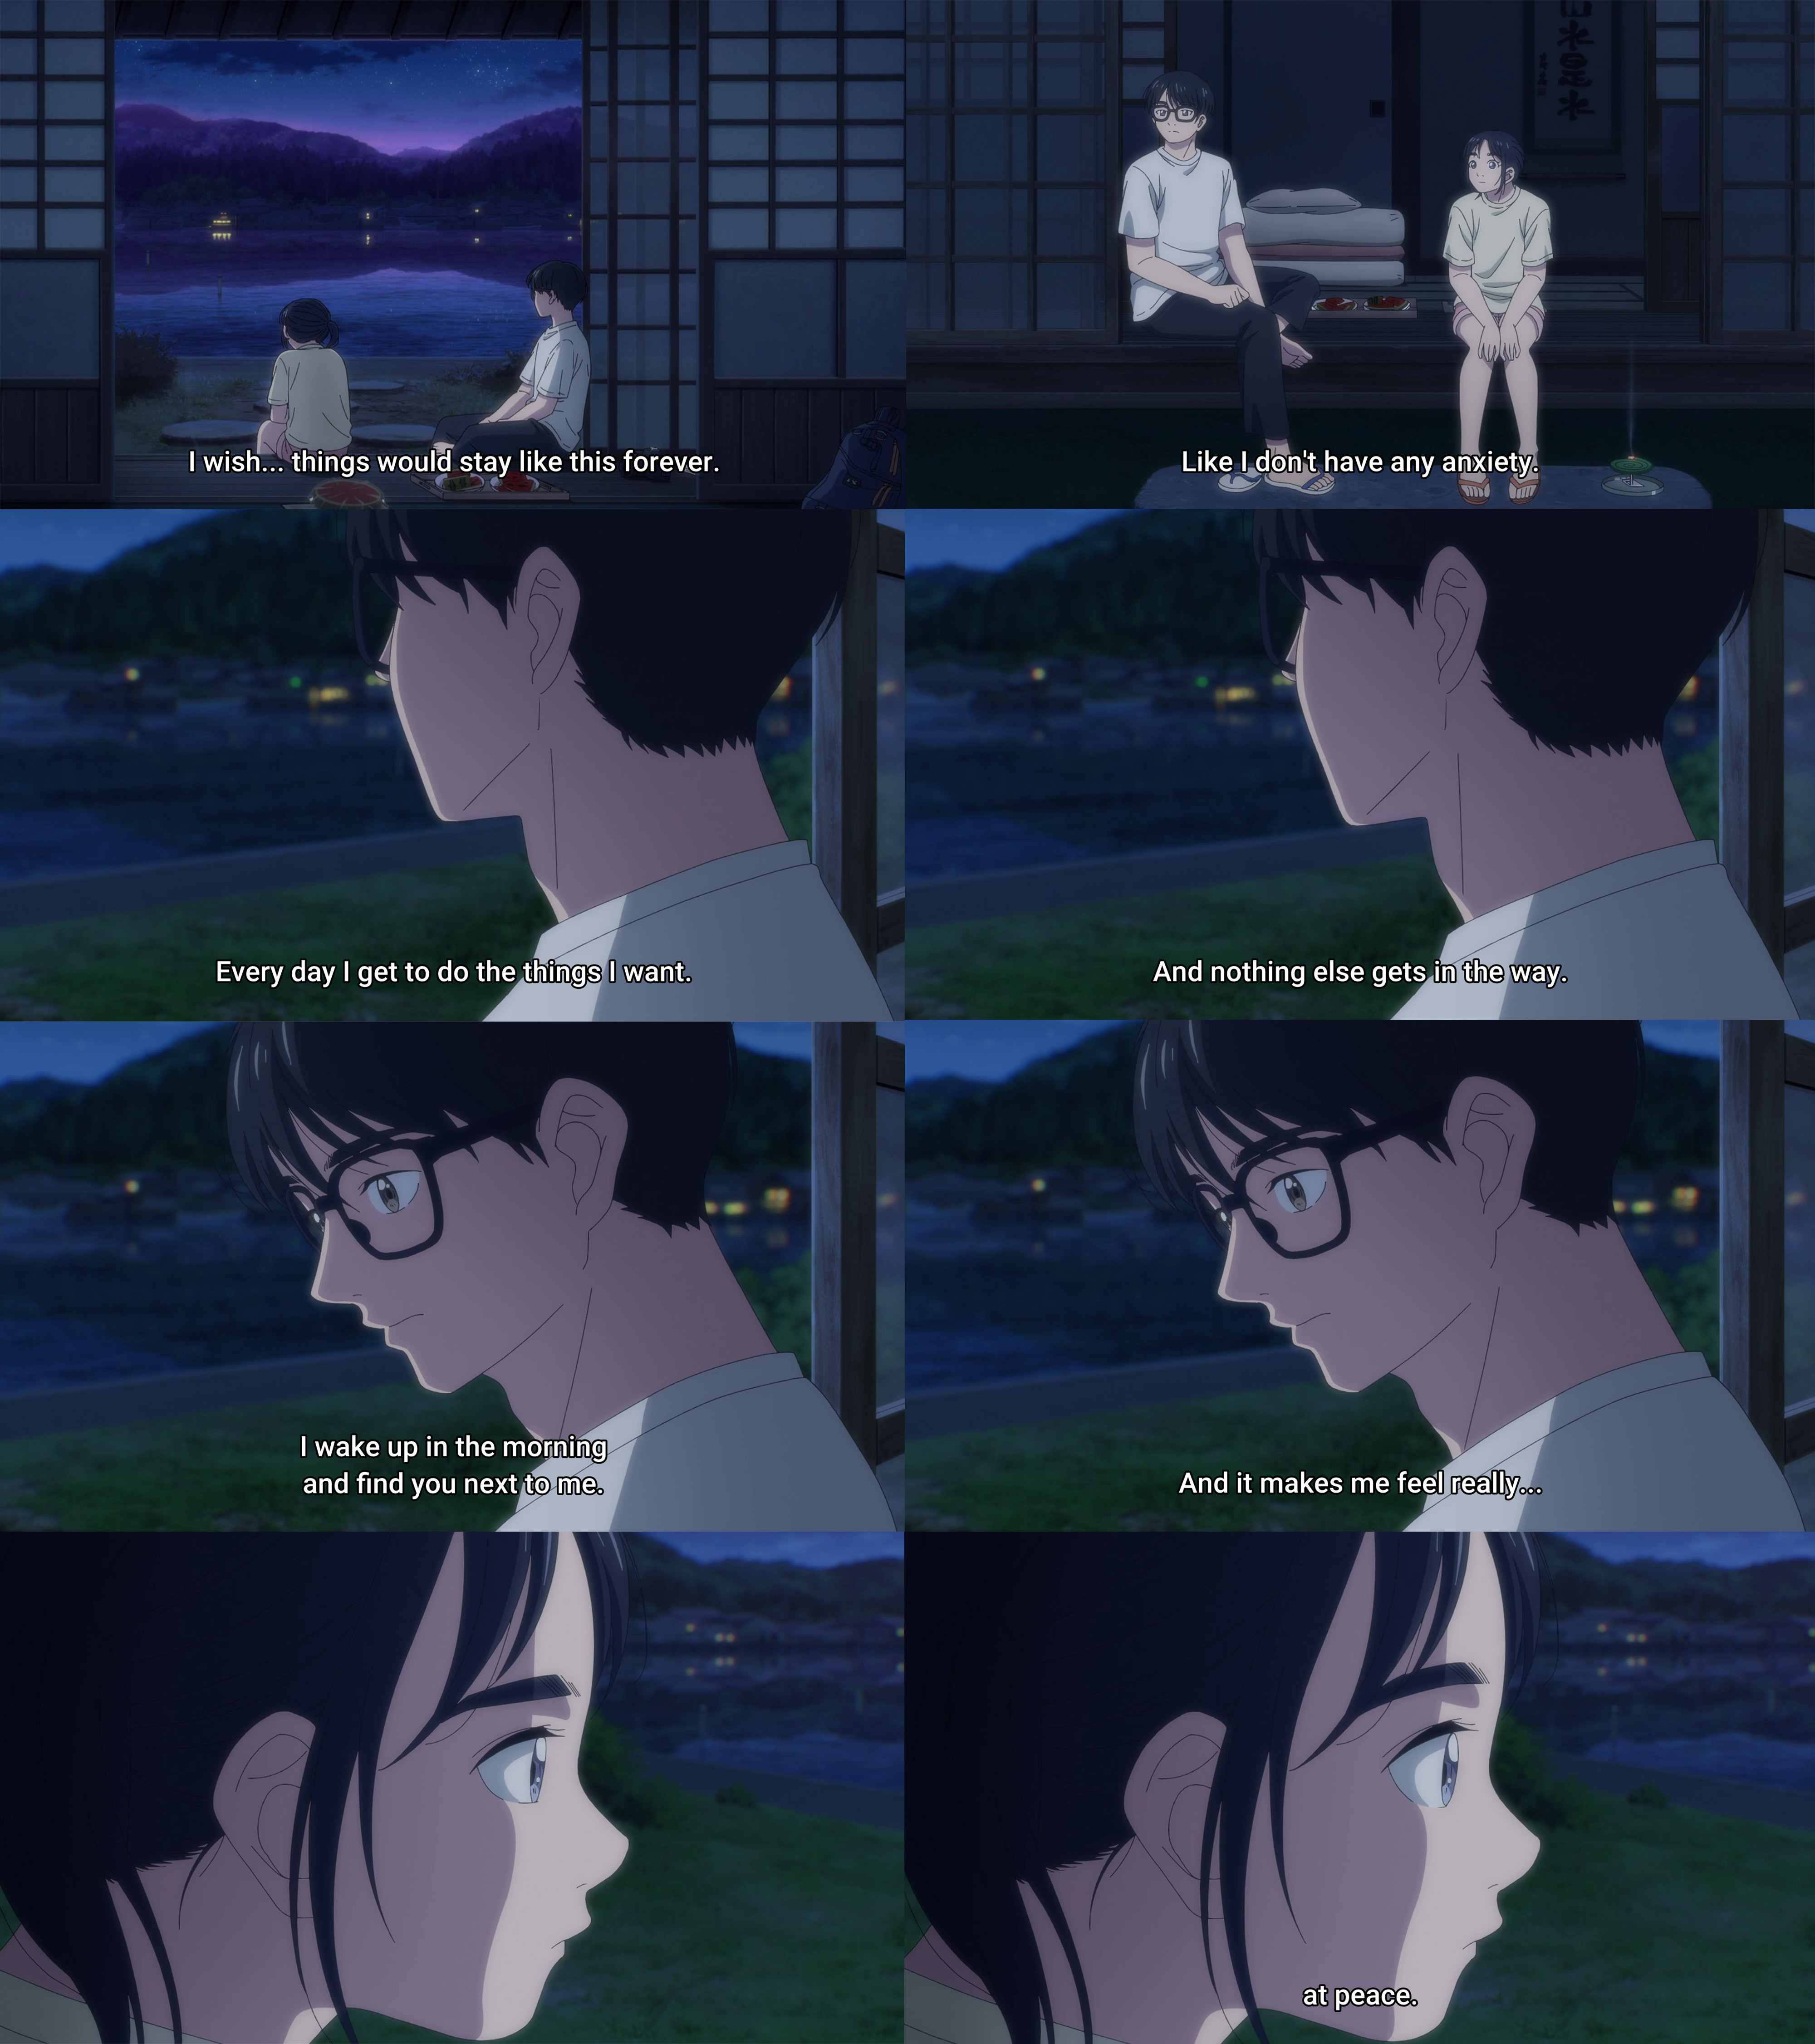 Scene from Houkago Insomnia: "I wish things would stay like this forever. Like I don't have any anxiety. Every day I get to do the things I want. And nothing else gets in the way. I wake up in the morning and find you next to me. And it makes me feel really... at peace."